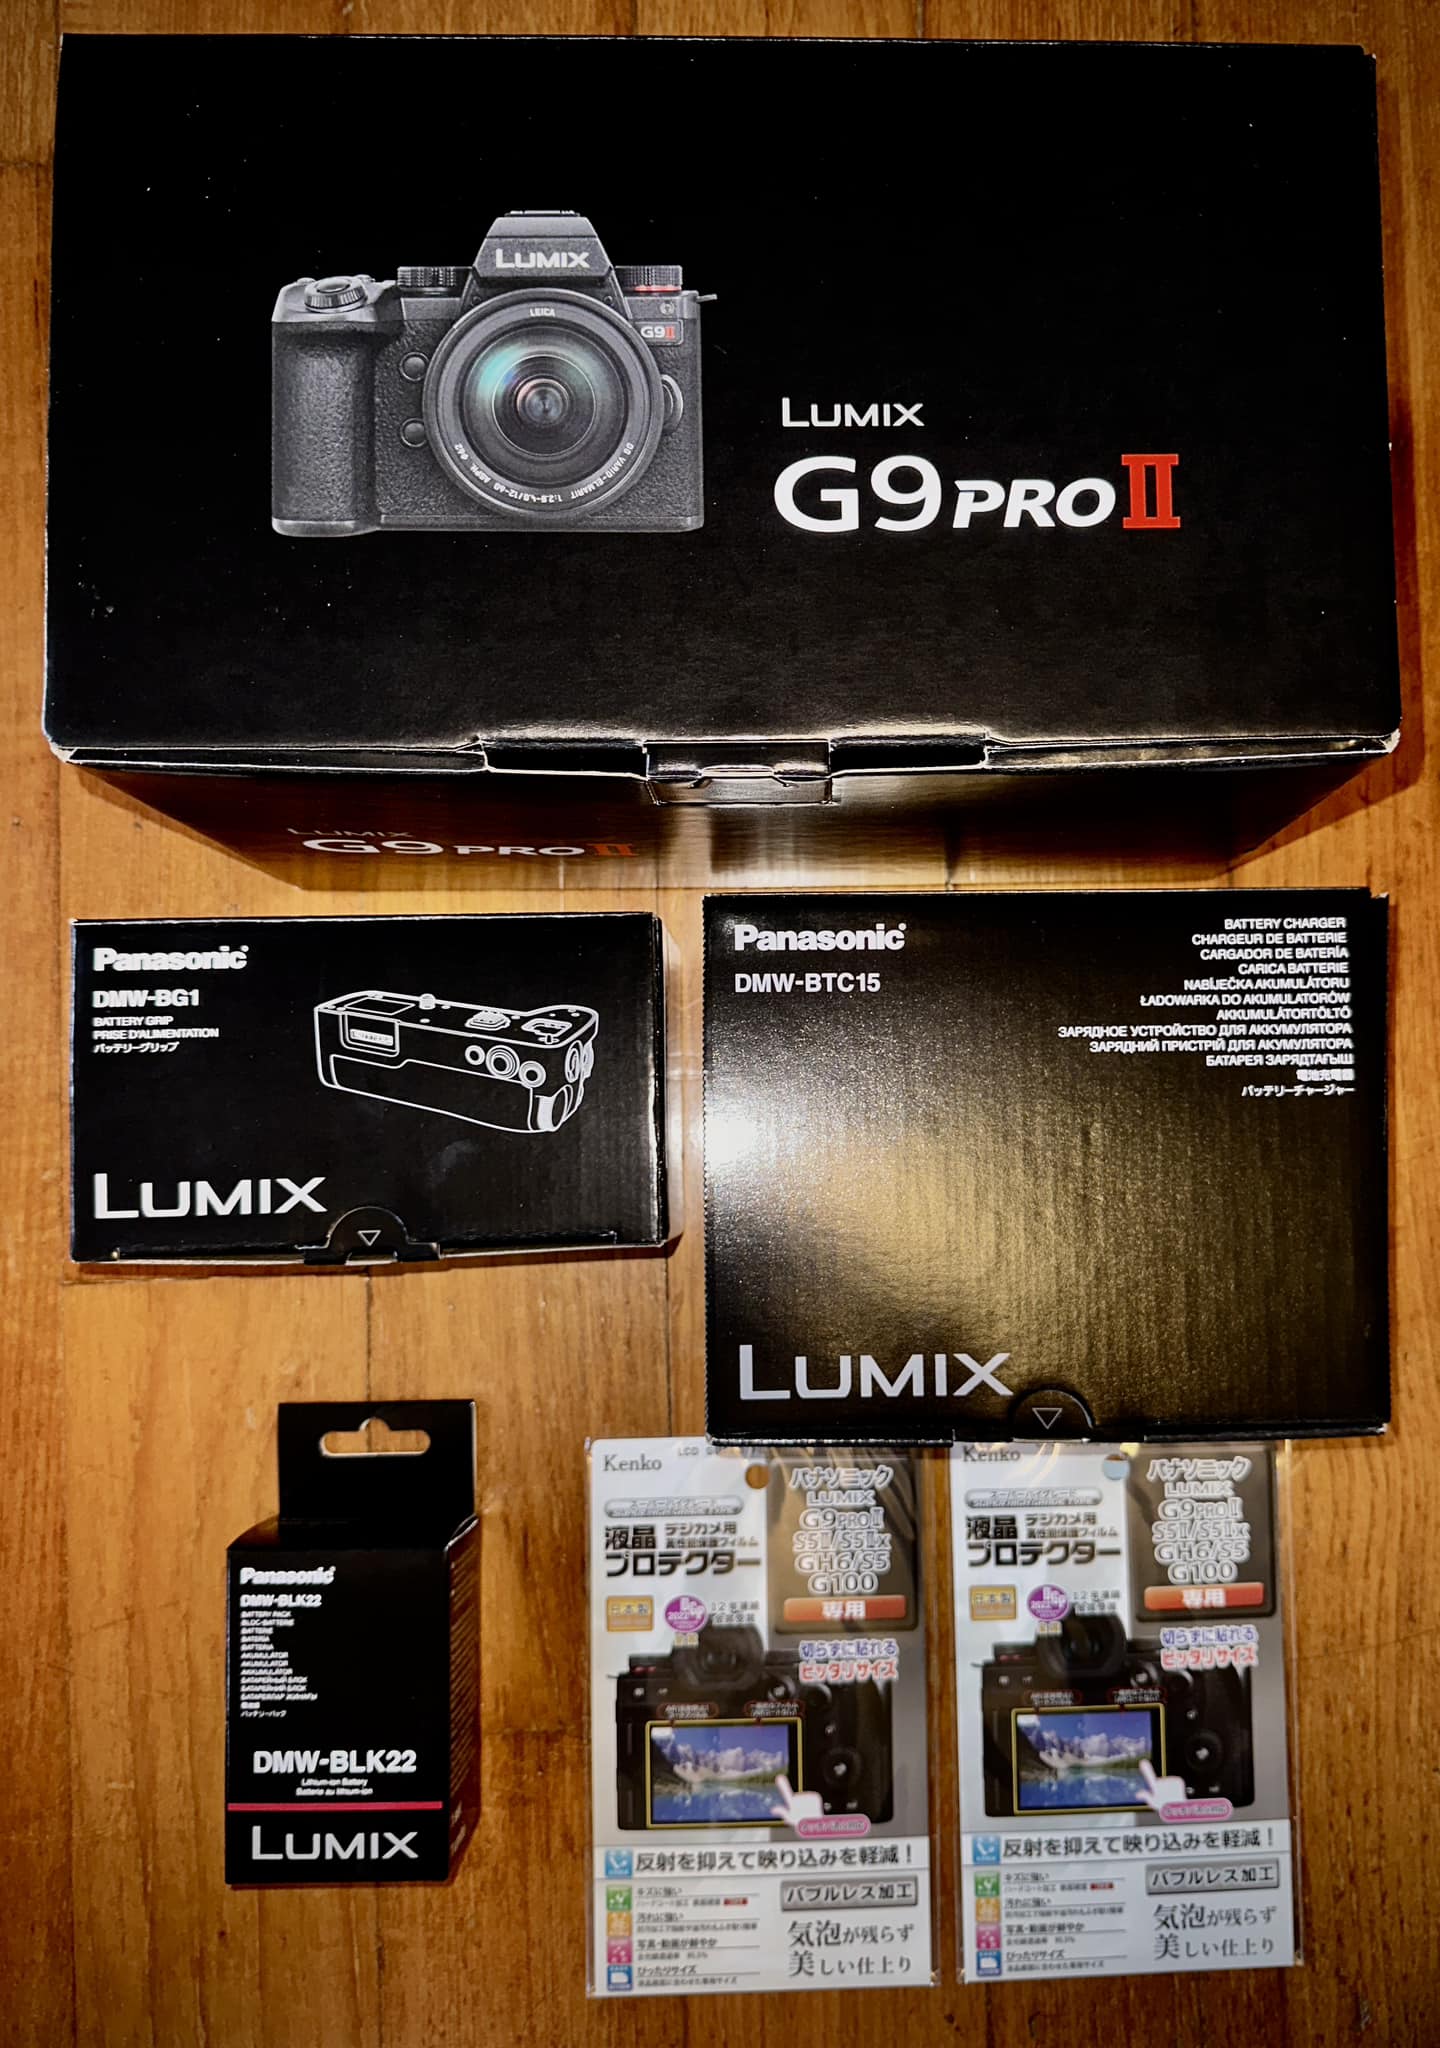 Is The Panasonic Lumix G9 II Getting 12-bit RAW HDMI Out?